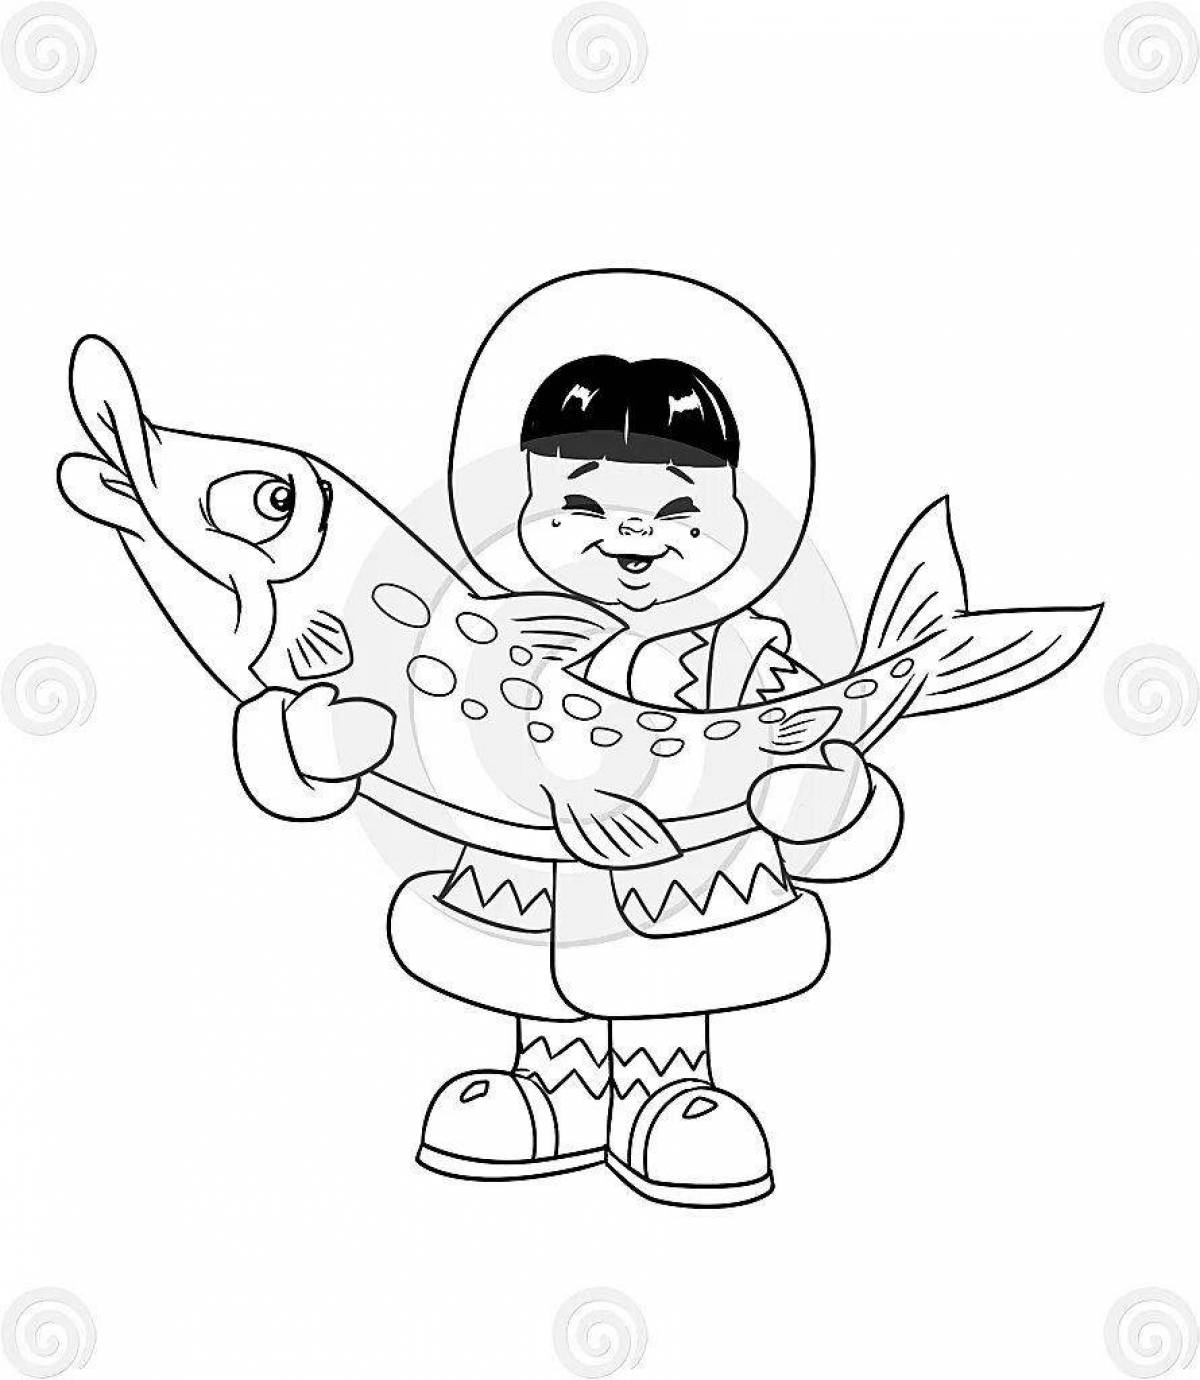 Colorful Khanty and Mansi coloring pages